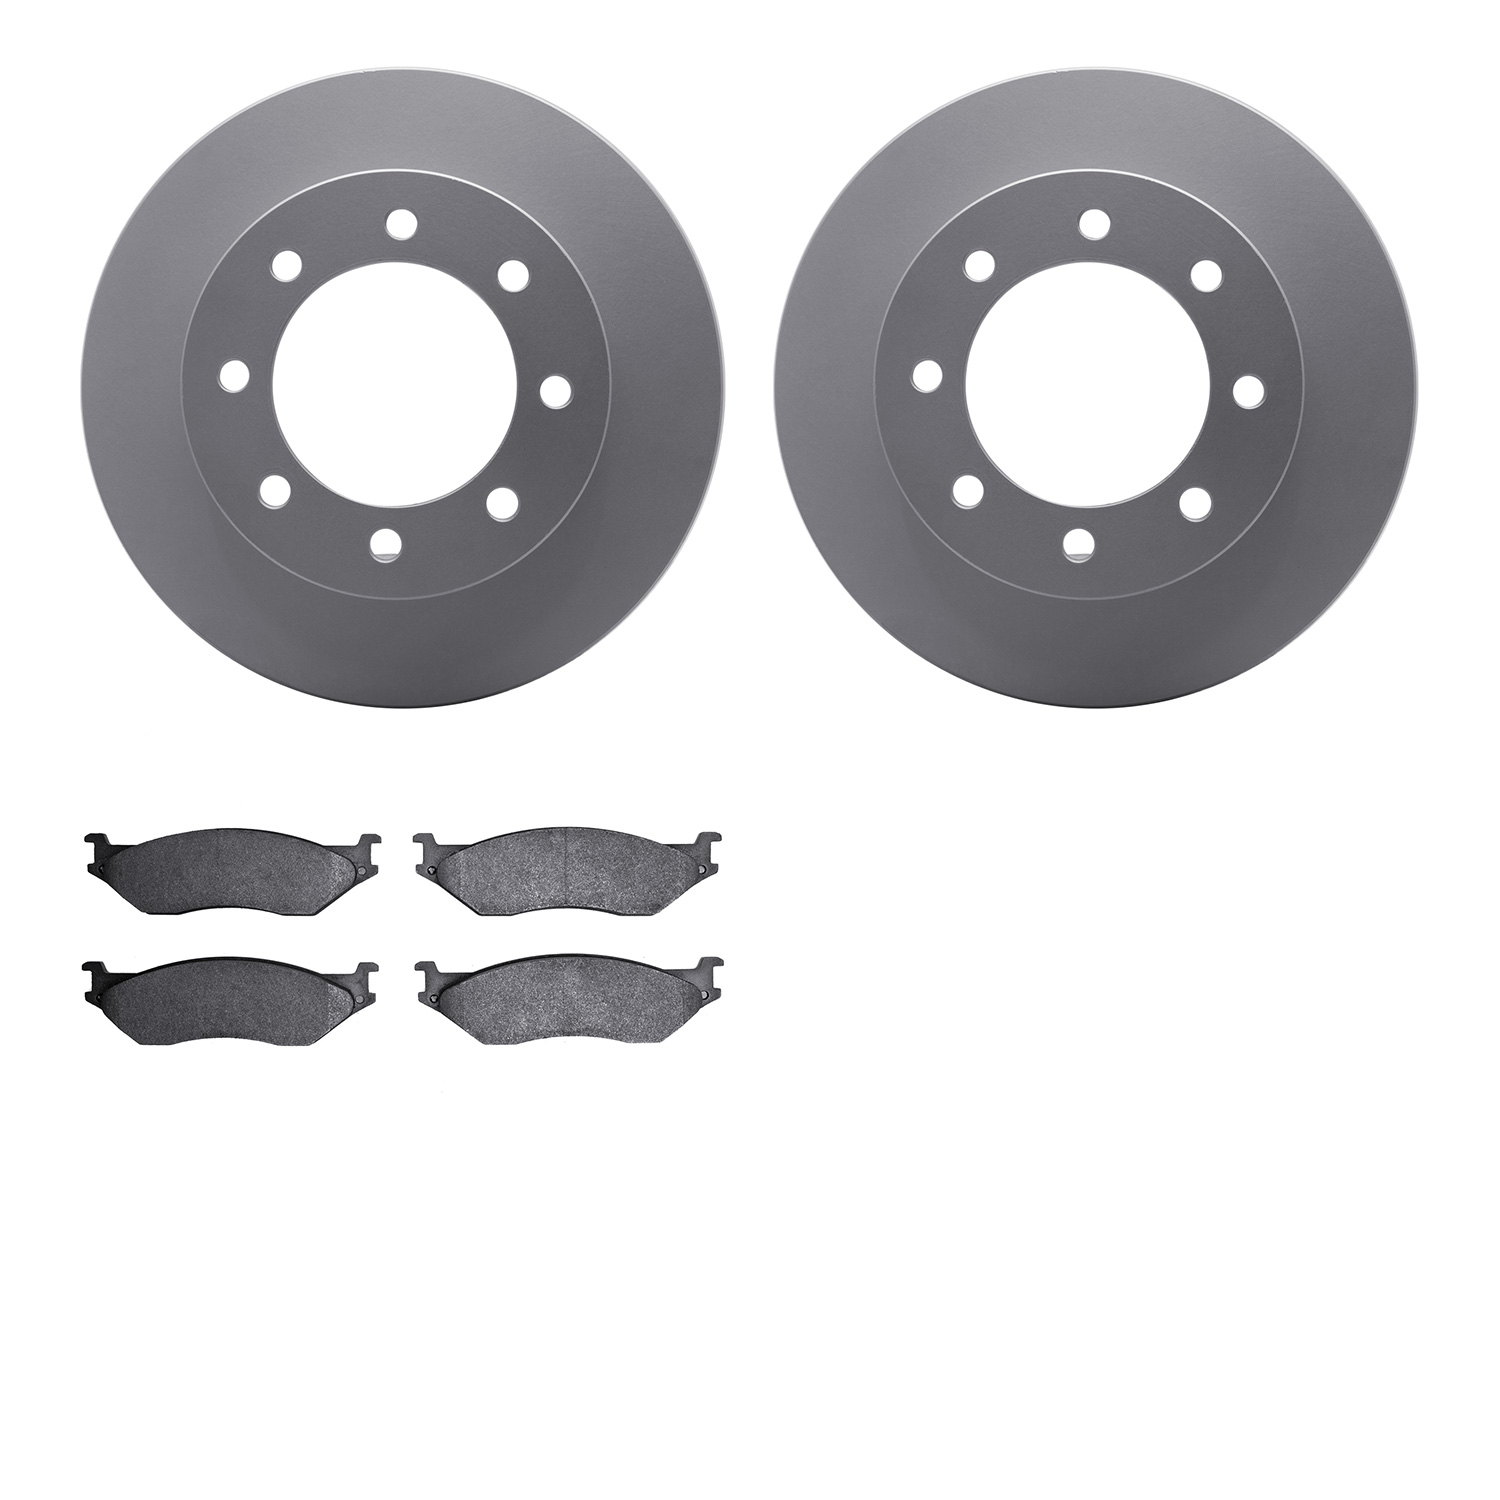 4402-54037 Geospec Brake Rotors with Ultimate-Duty Brake Pads Kit, 1999-2005 Ford/Lincoln/Mercury/Mazda, Position: Front